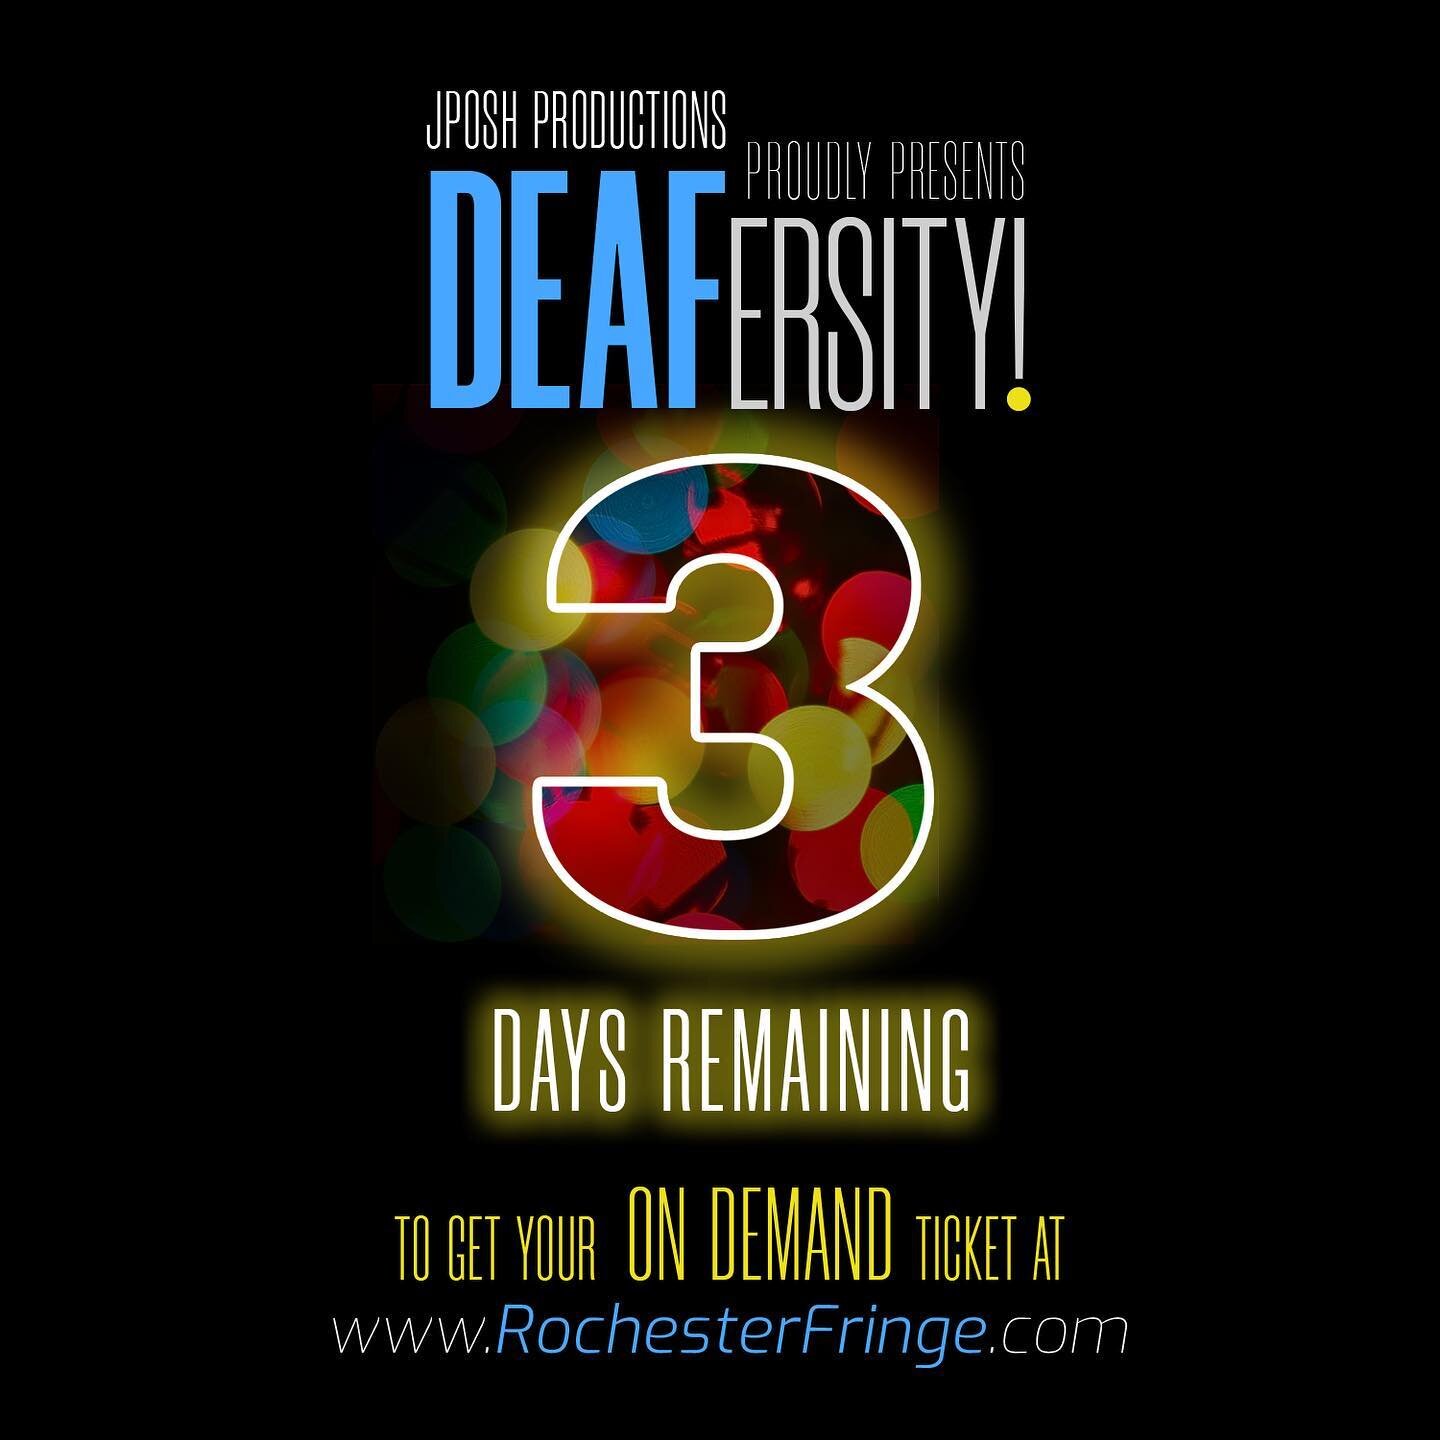 This is the last week to purchase tickets and celebrate International  Week of the Deaf with us as JPosh Productions proudly presents DEAFersity! and joins the 2020 Virtual Rochester Fringe Festival vía On Demand.

Tickets are only AVAILABLE for THR